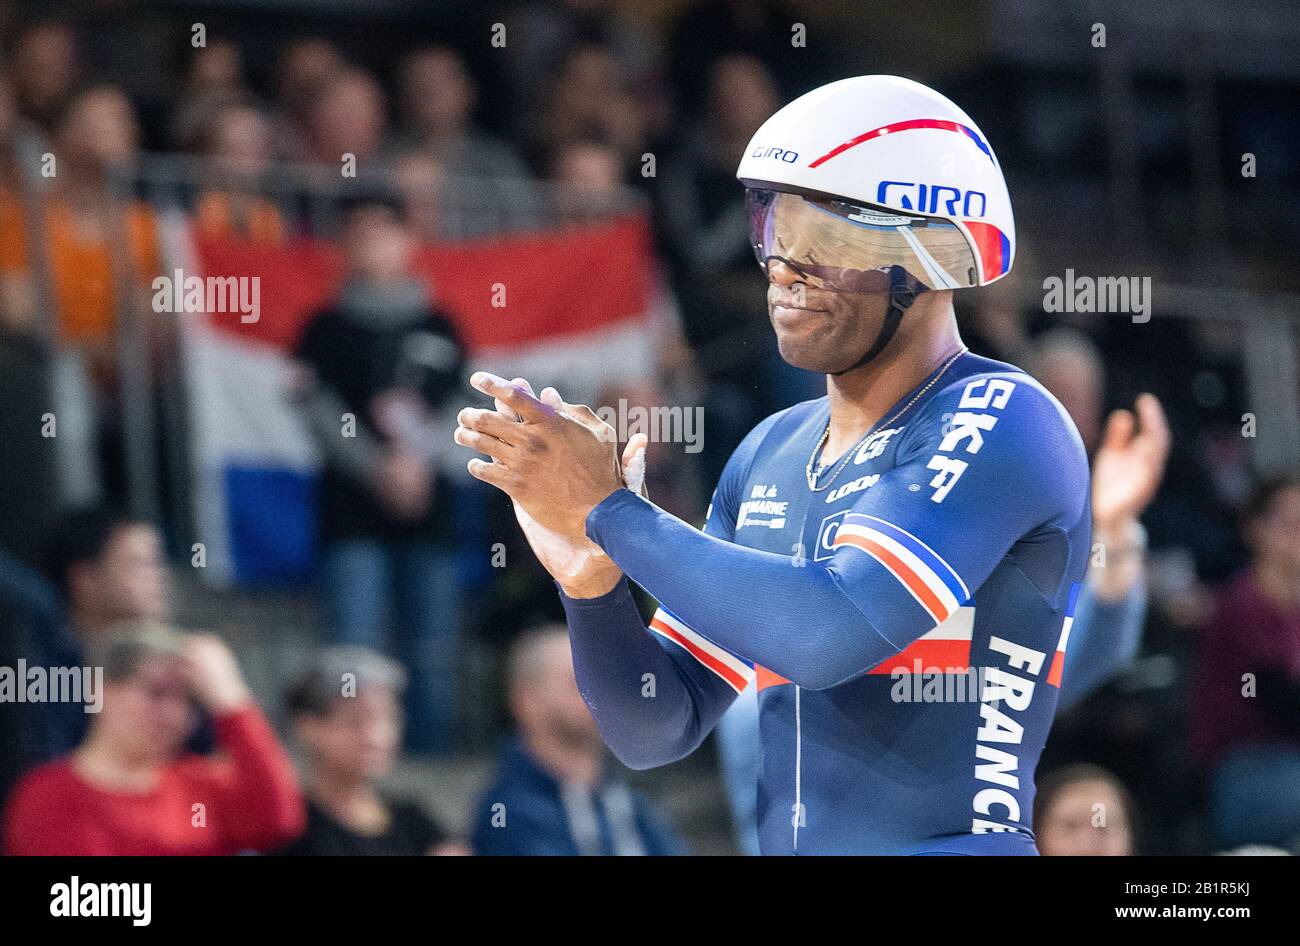 Berlin, Germany. 26th Feb, 2020. Cycling/track: World Championship, team sprint men, final: Gregory Bauge from France applauds after his team finished 4th. Credit: Sebastian Gollnow/dpa/Alamy Live News Stock Photo